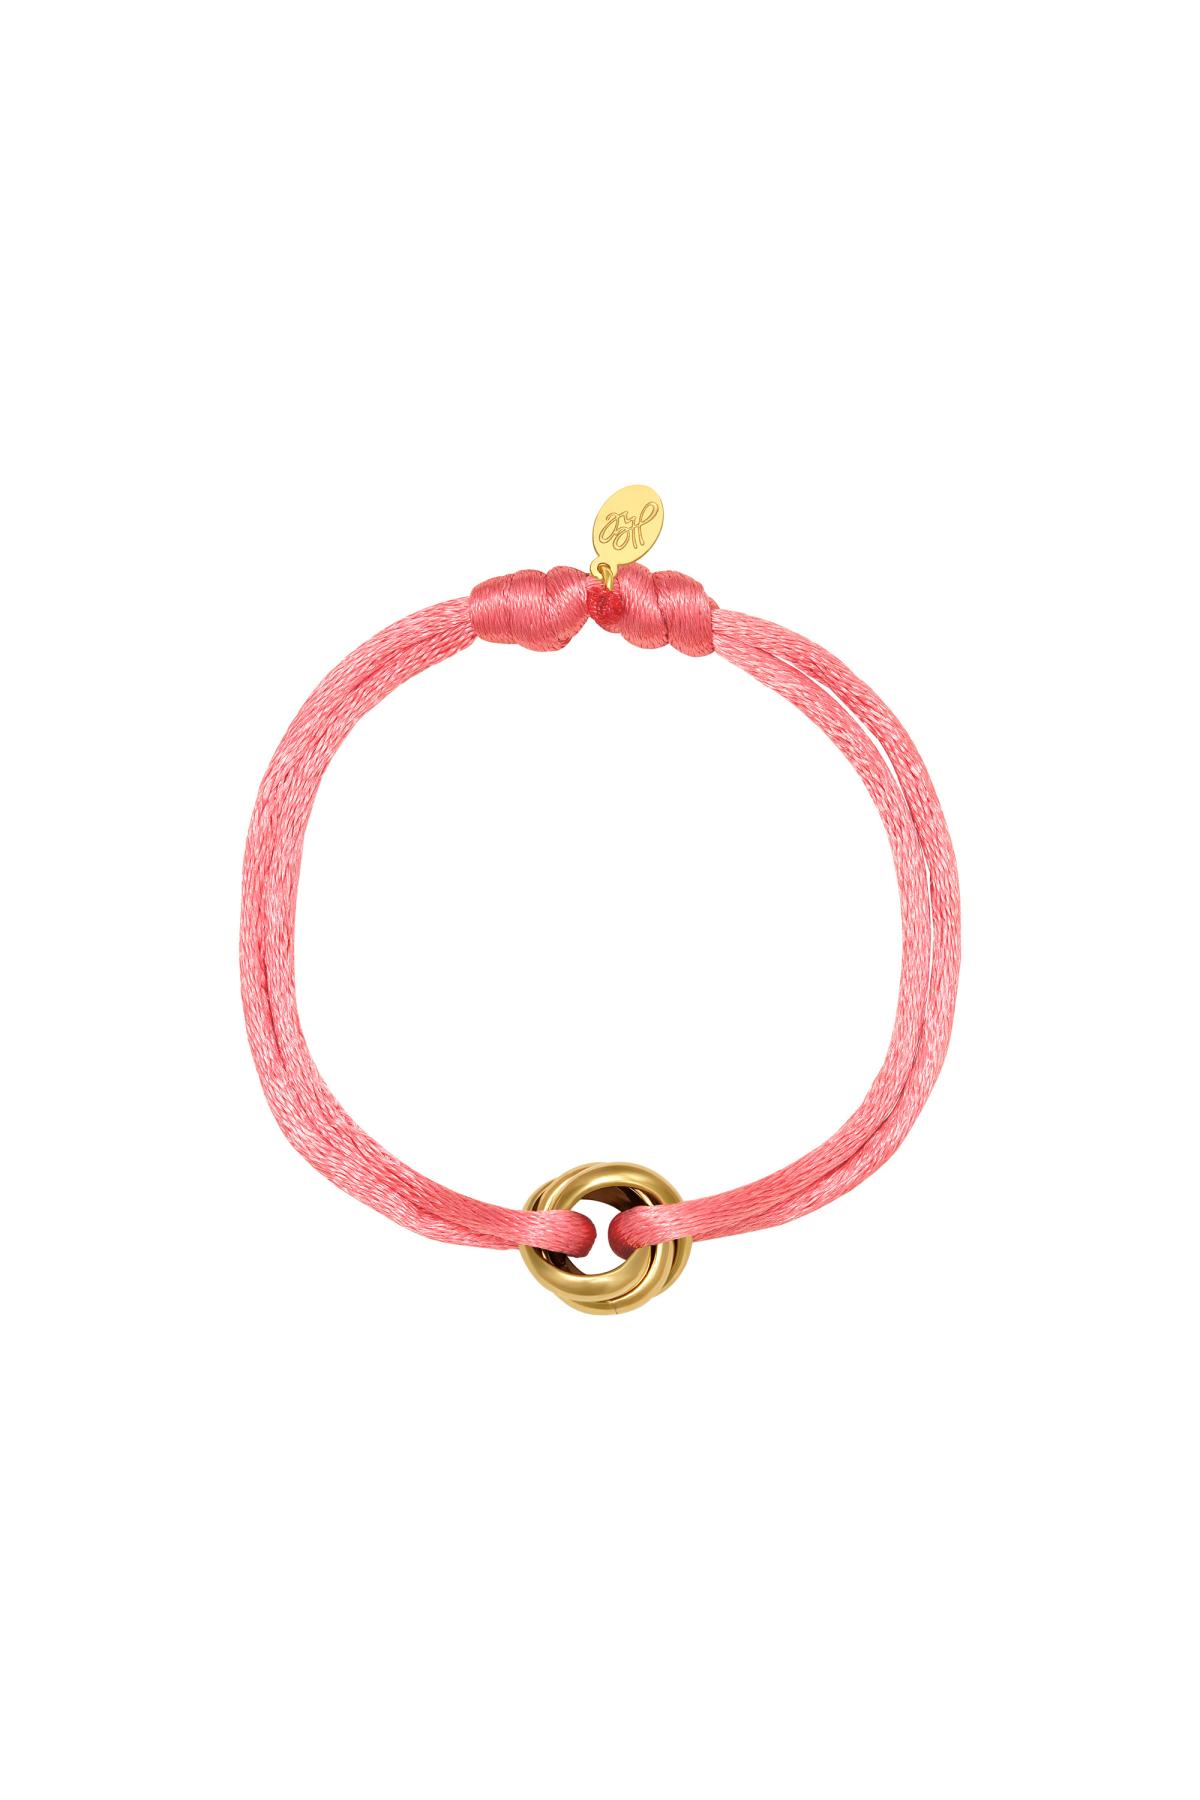 Pink & Gold / Bracelet Satin Knot Pink & Gold Stainless Steel Picture8